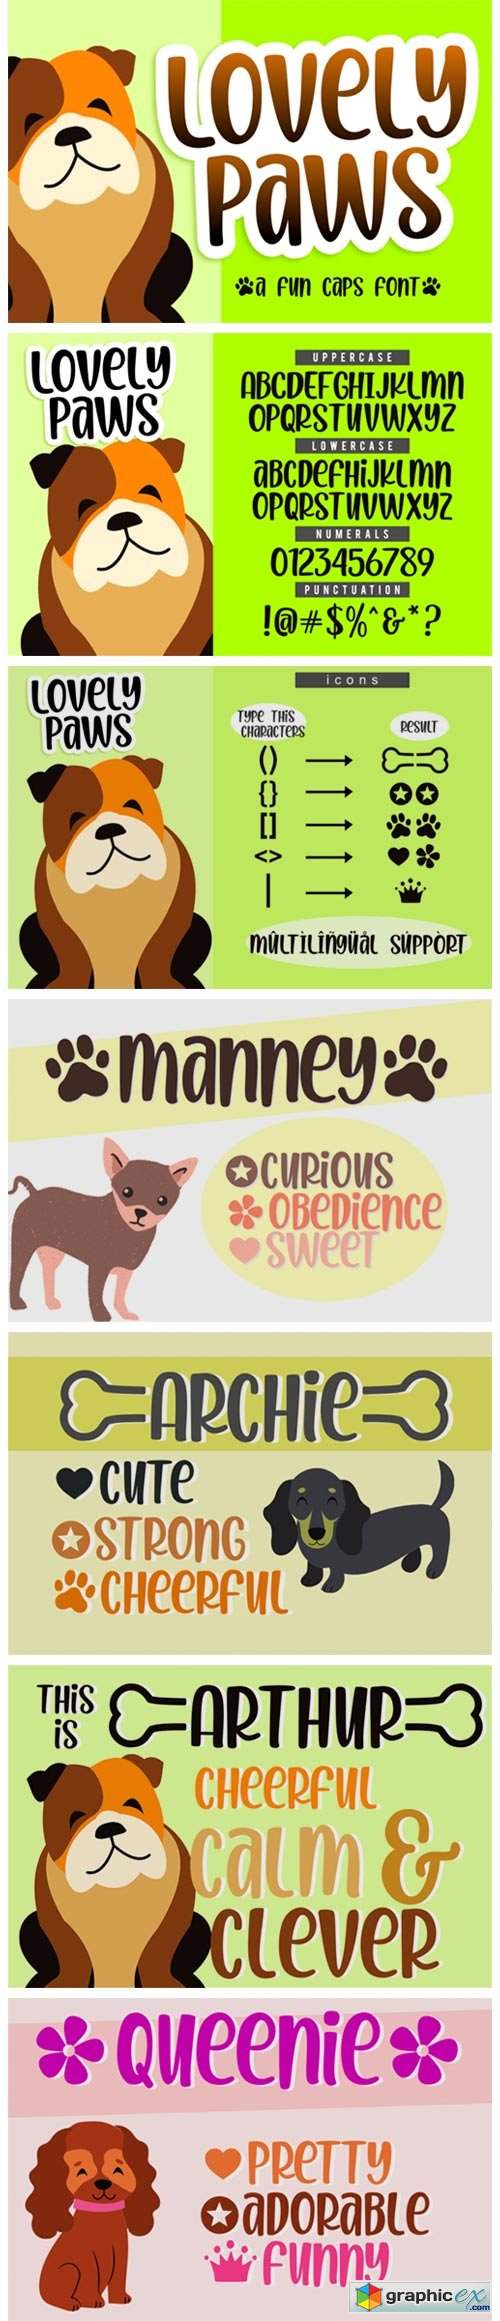  Lovely Paws Font 